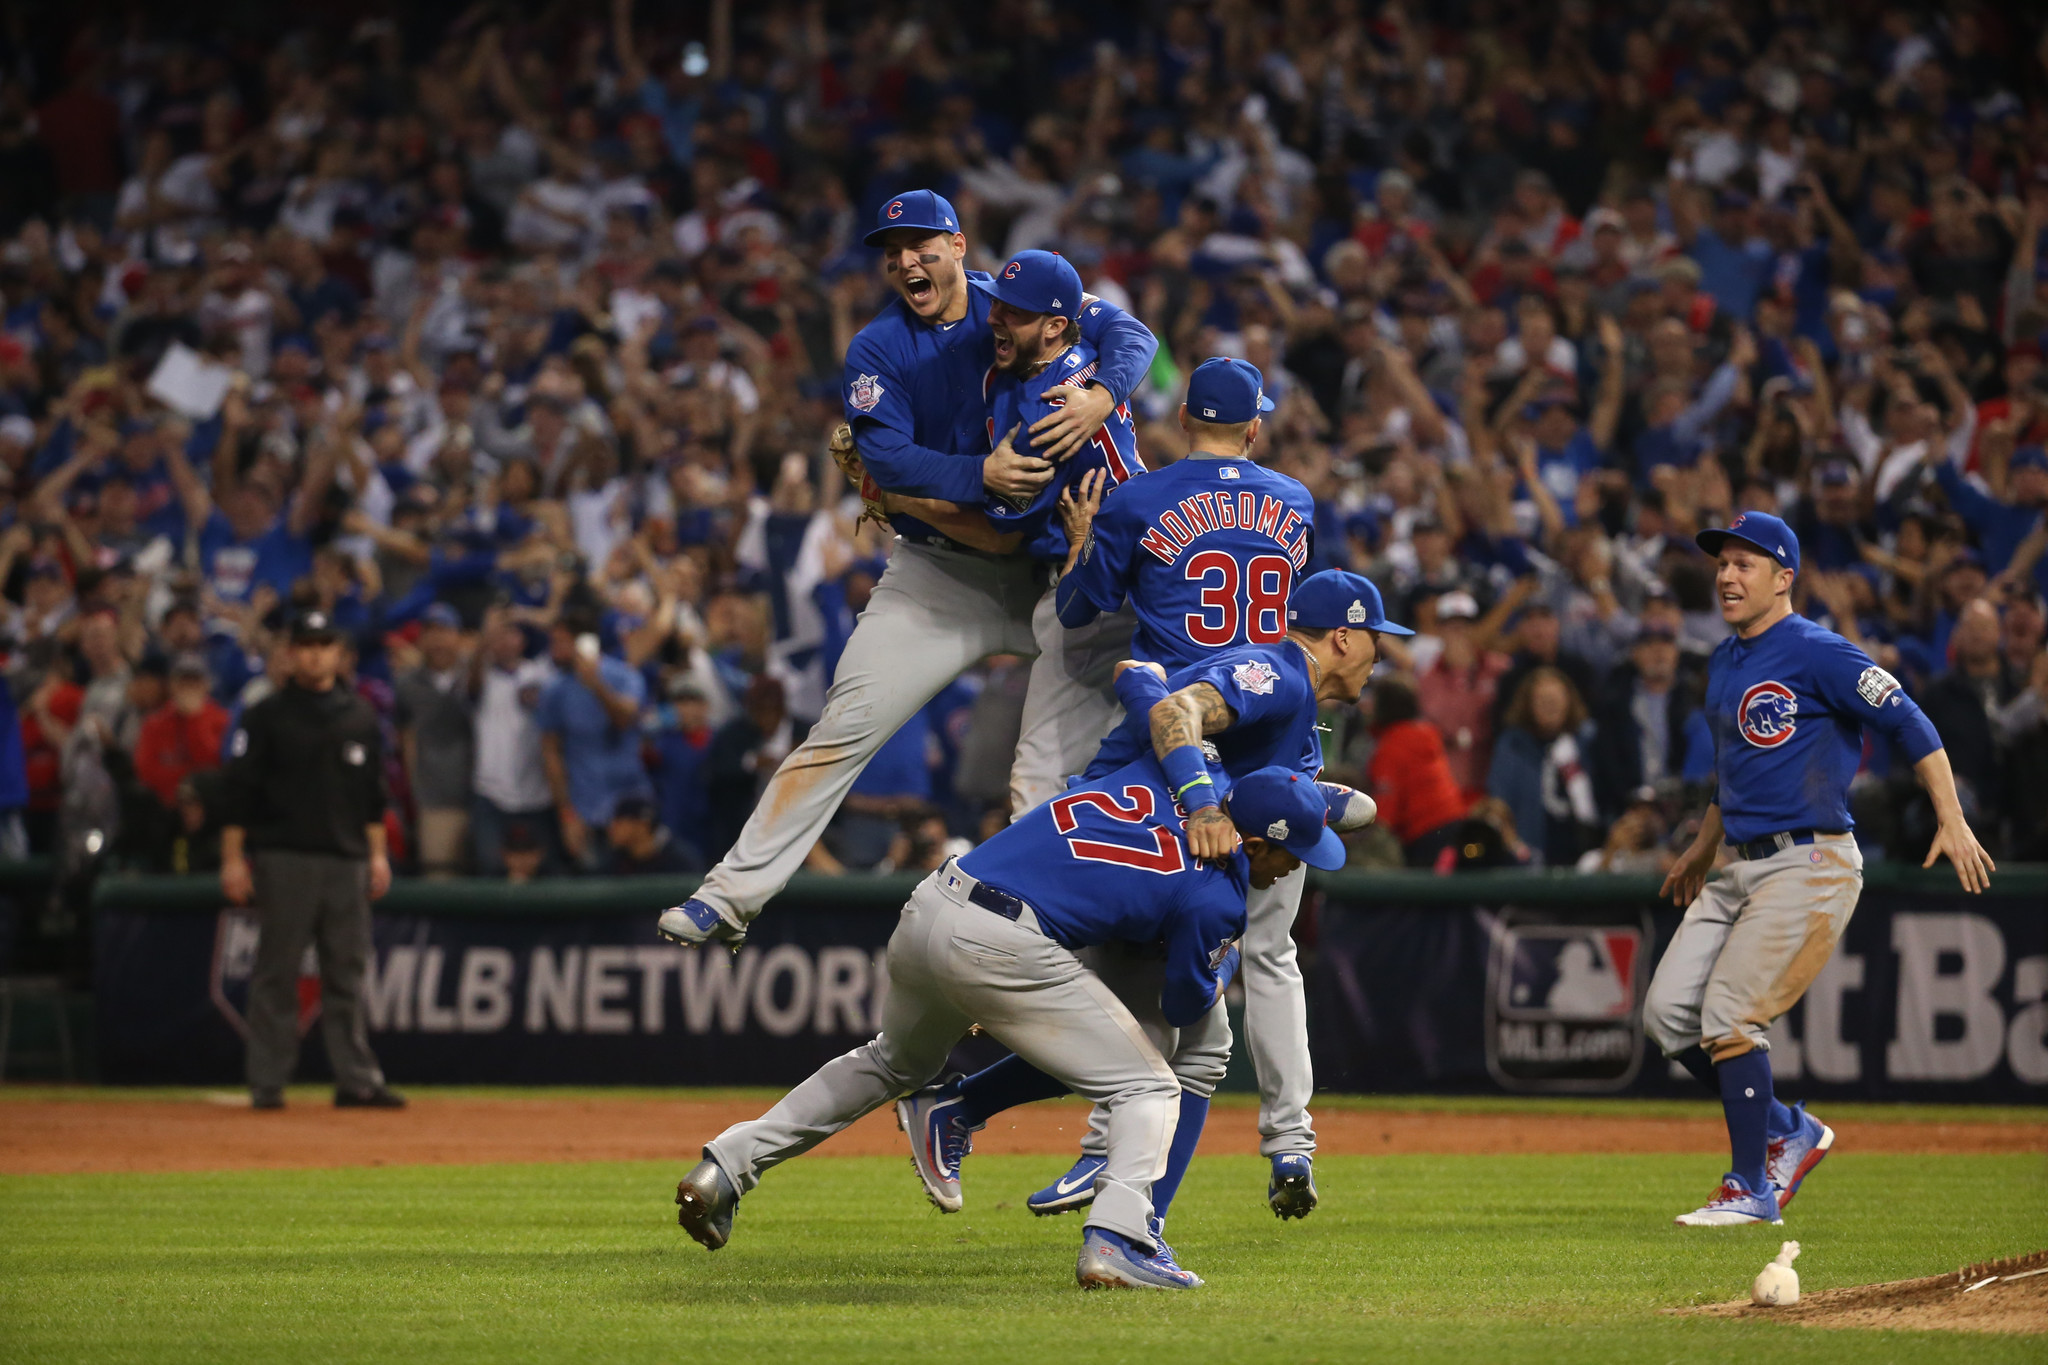 Nov. 2, 2016: Cubs win the World Series - Chicago Tribune